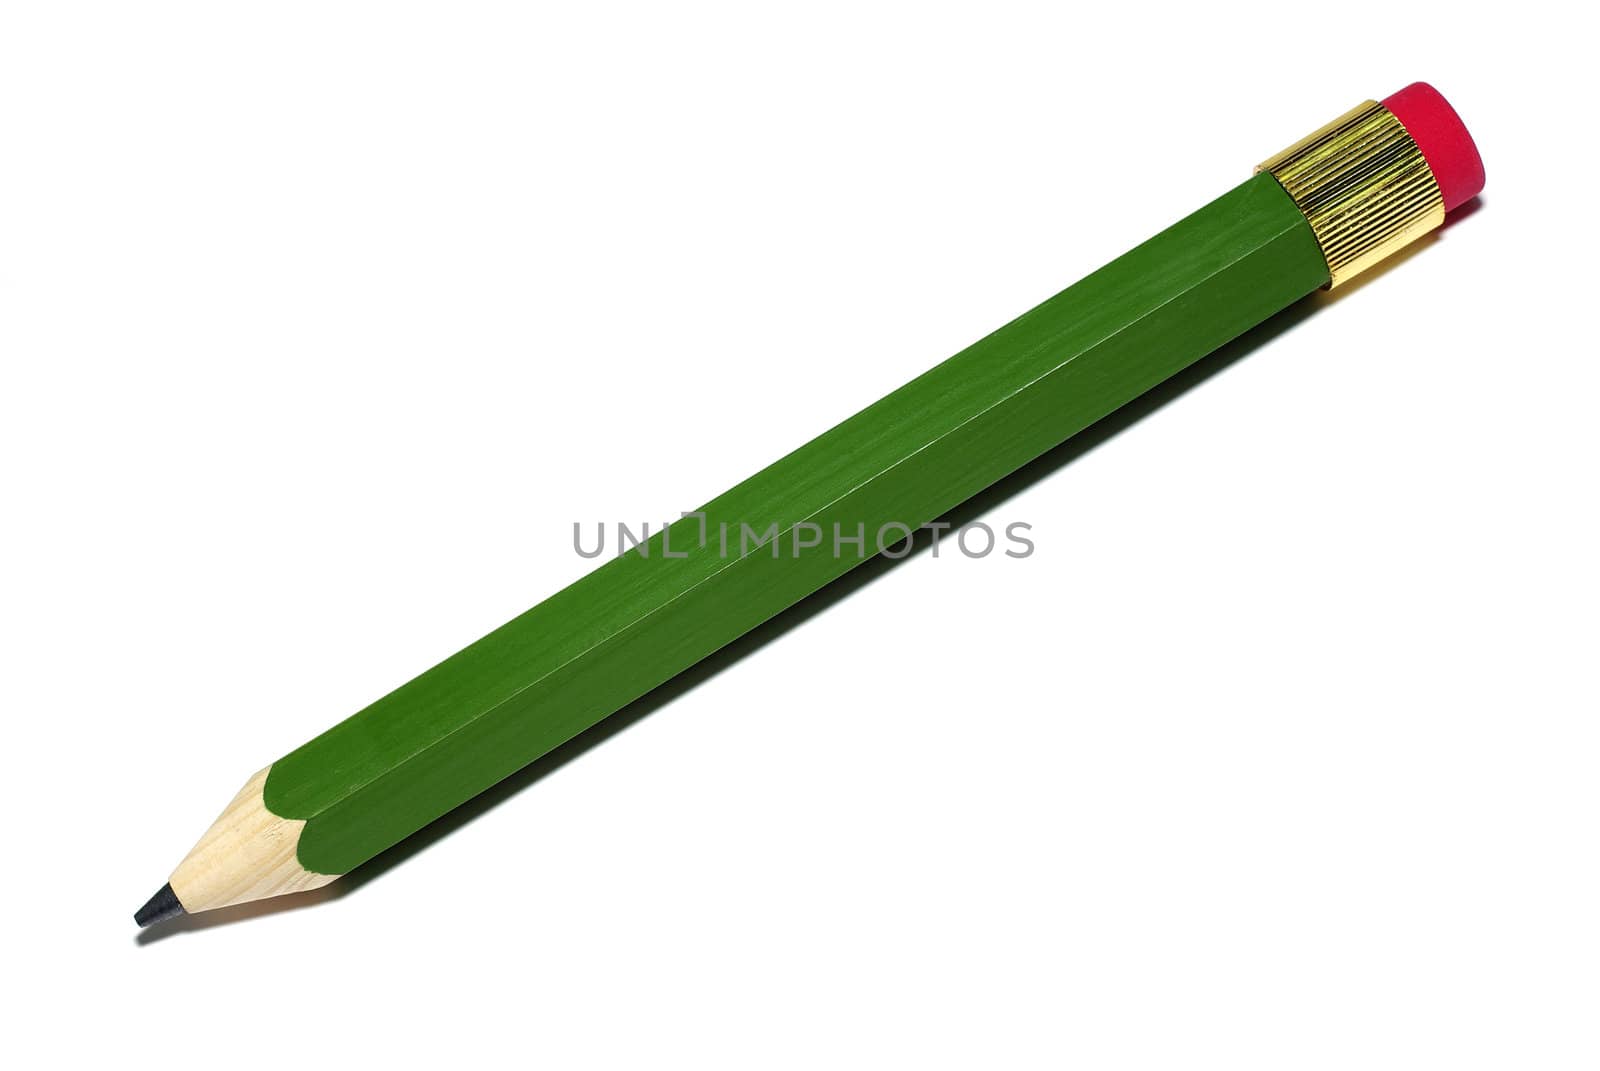 Big green pencil with red eraser isolated on white background.